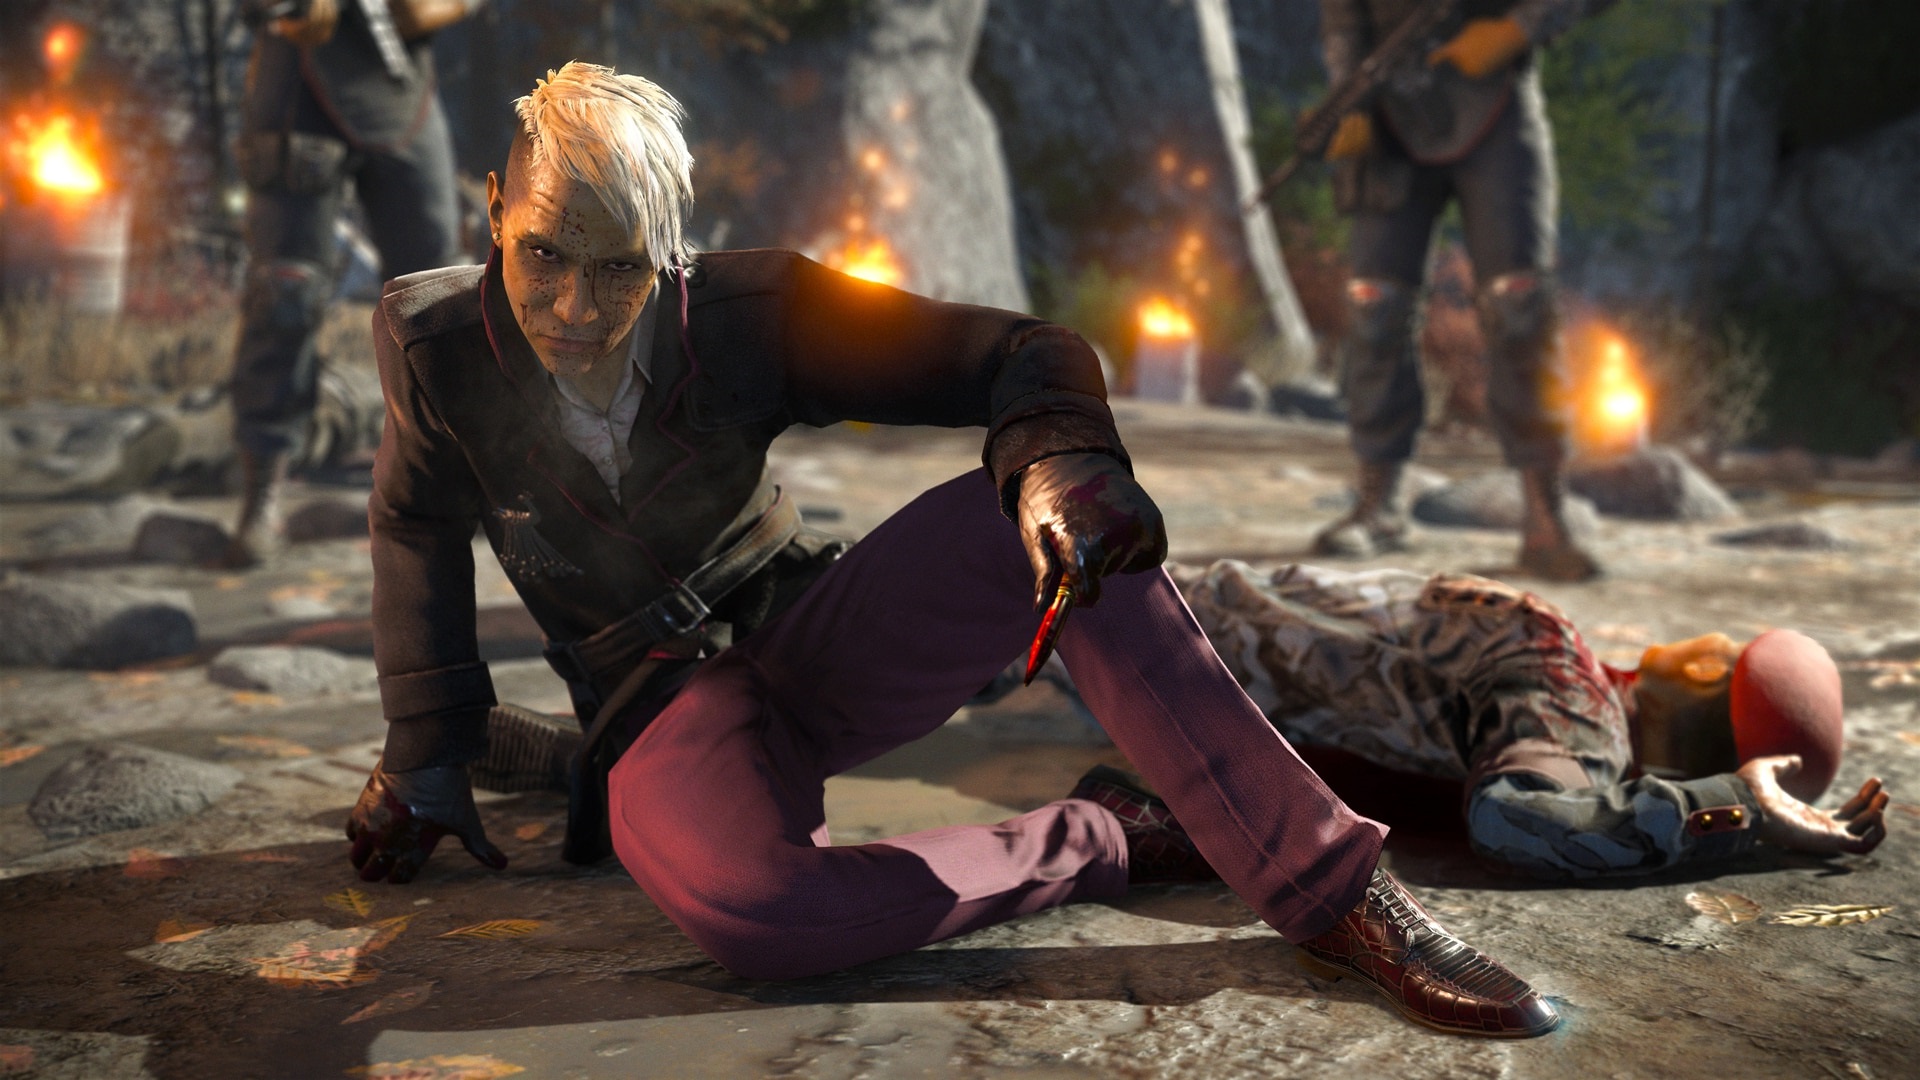 Far Cry 4 PC Game Full Version Cracked Setup Download Free